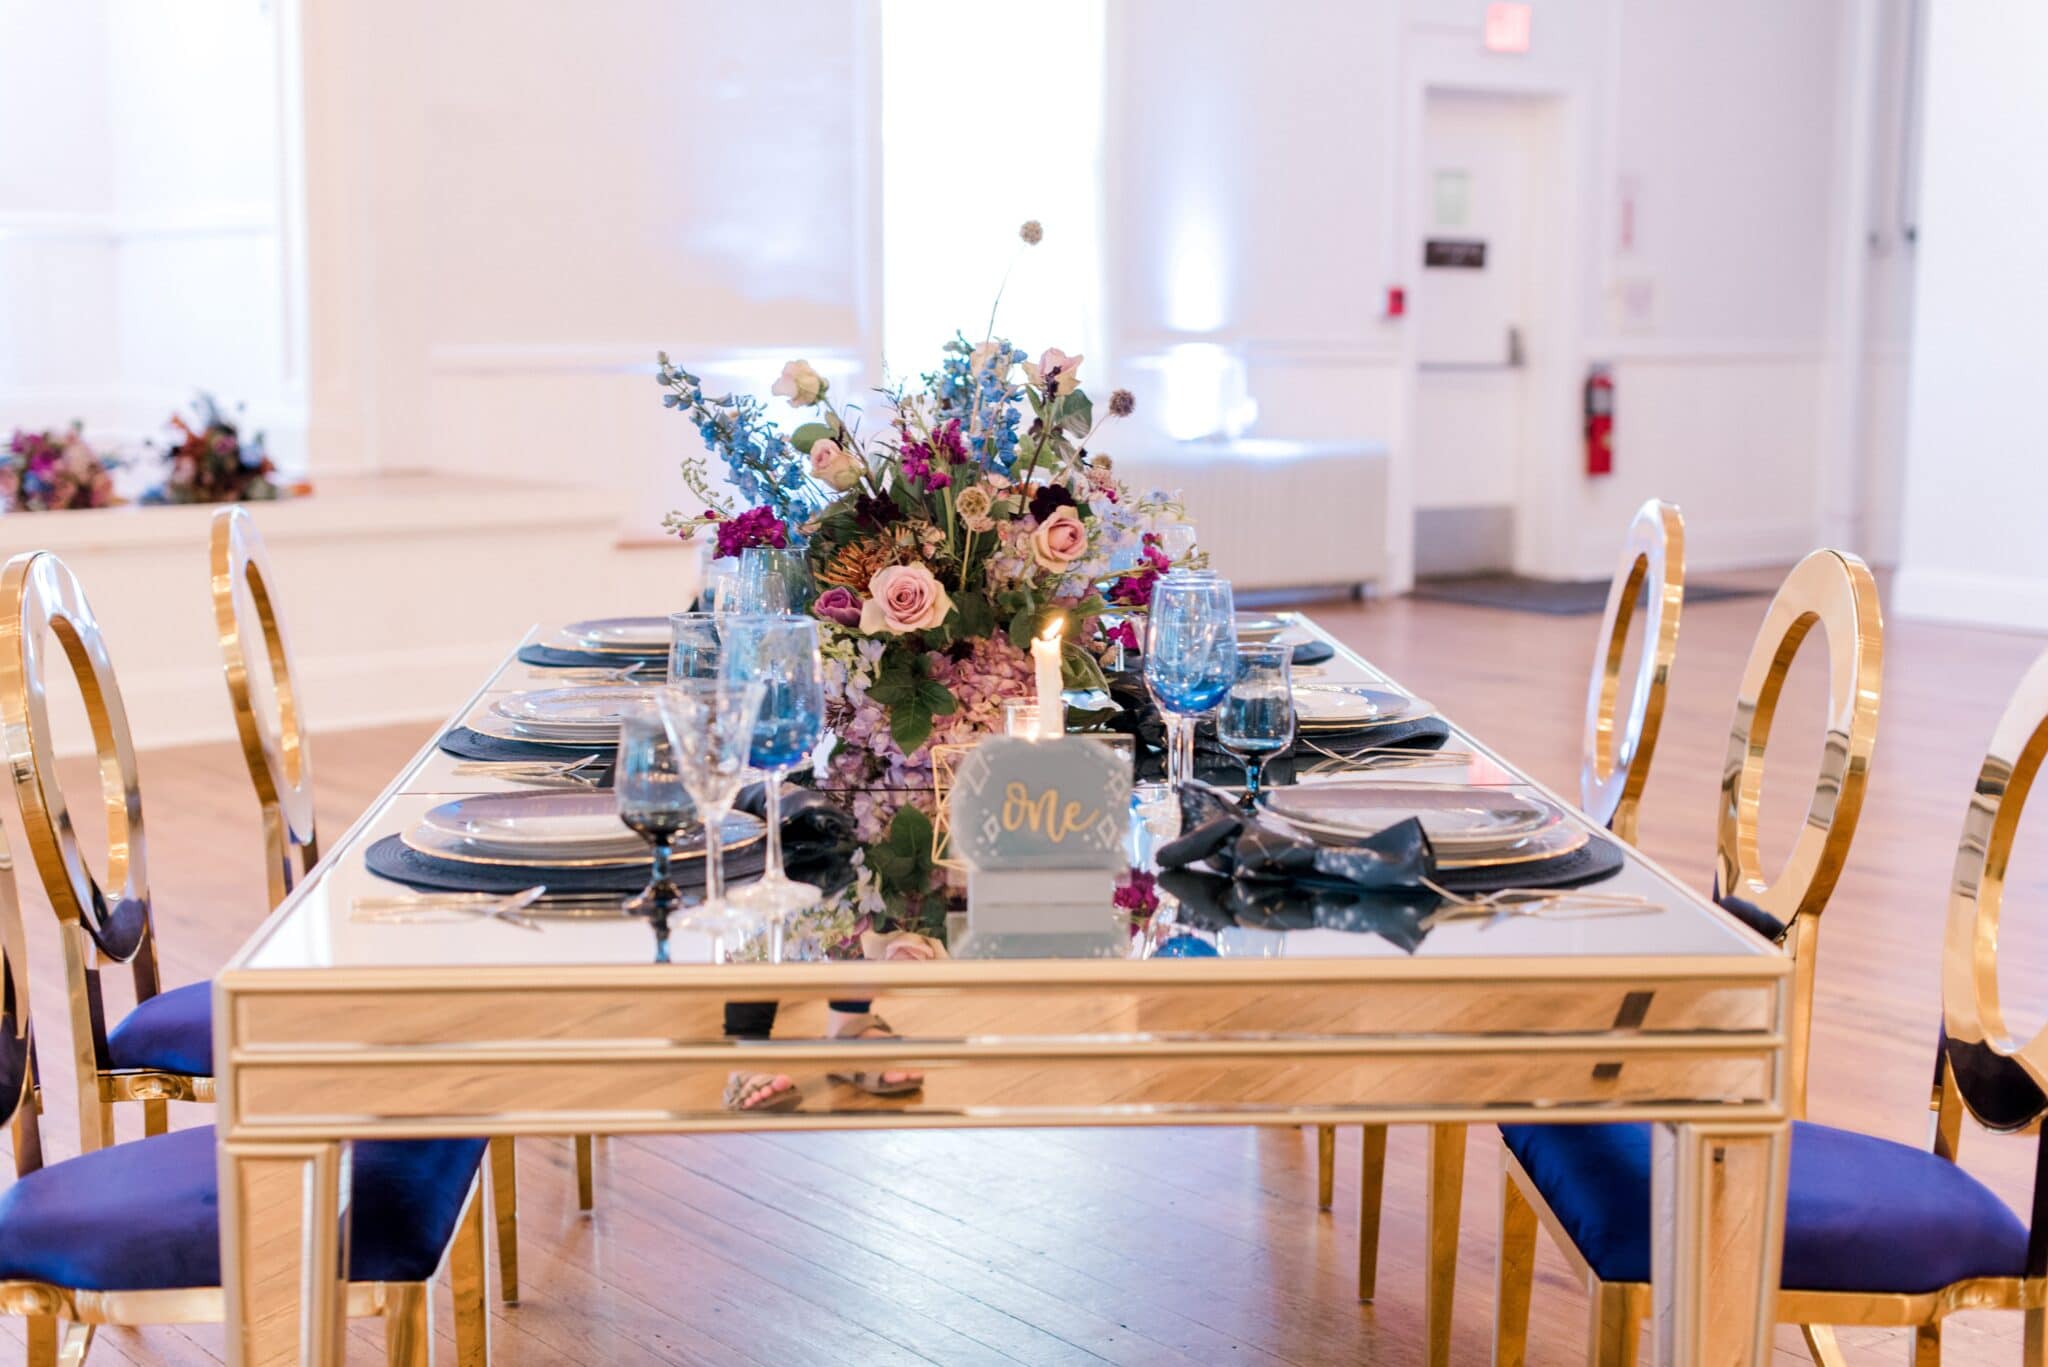 golden table with gold and blue padded chairs and the tabletop decorated with table number and tablewear along with floral arrangement